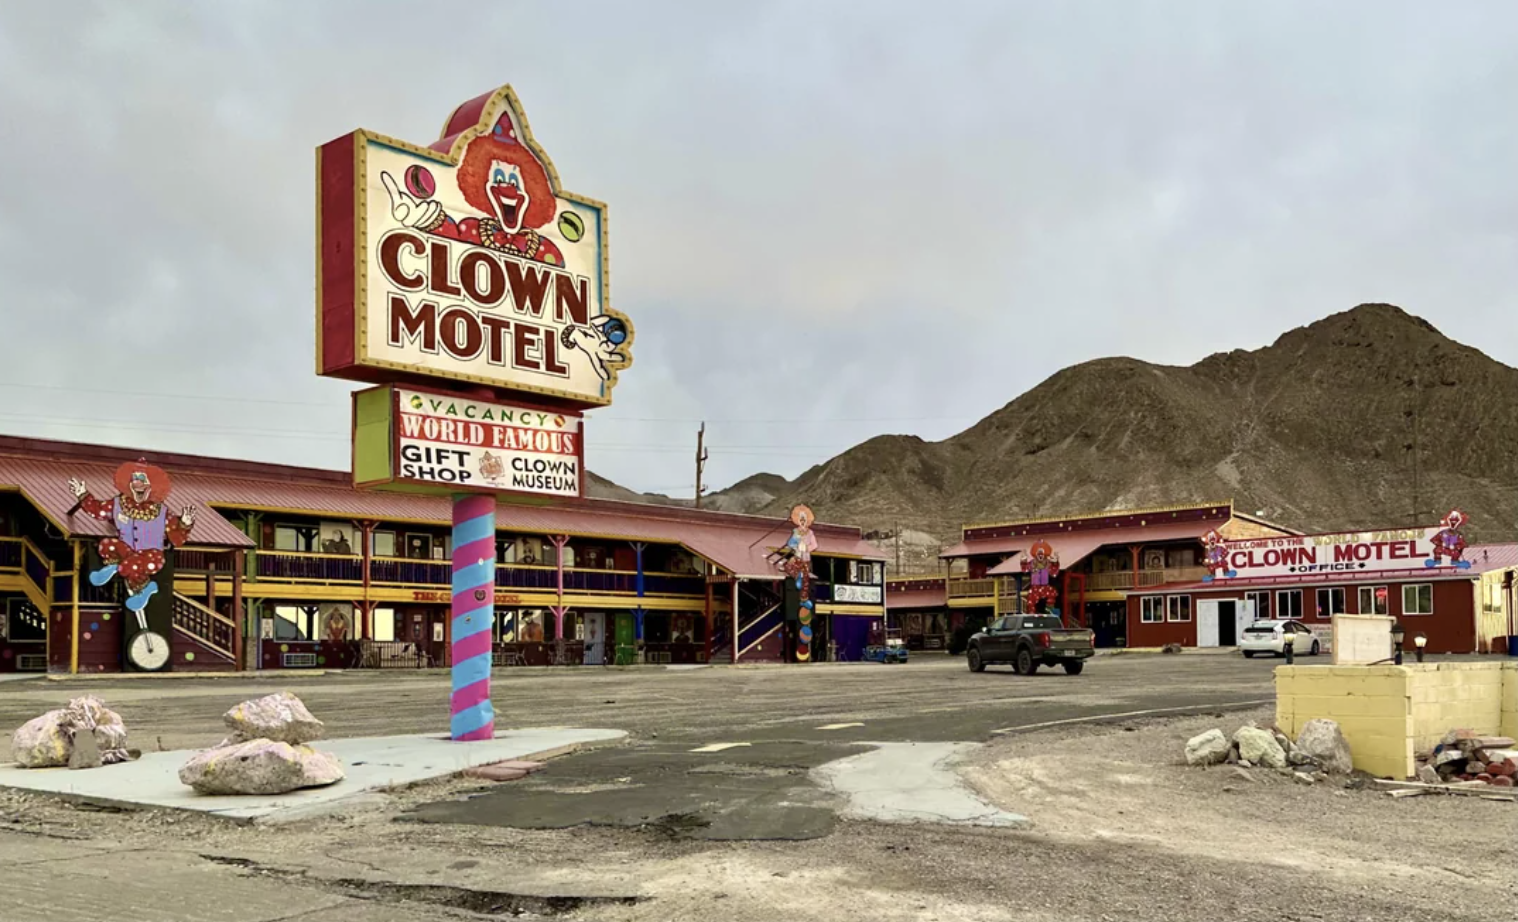 Clown-themed motel with large sign and clown figures outside; adjacent to a mountainous backdrop